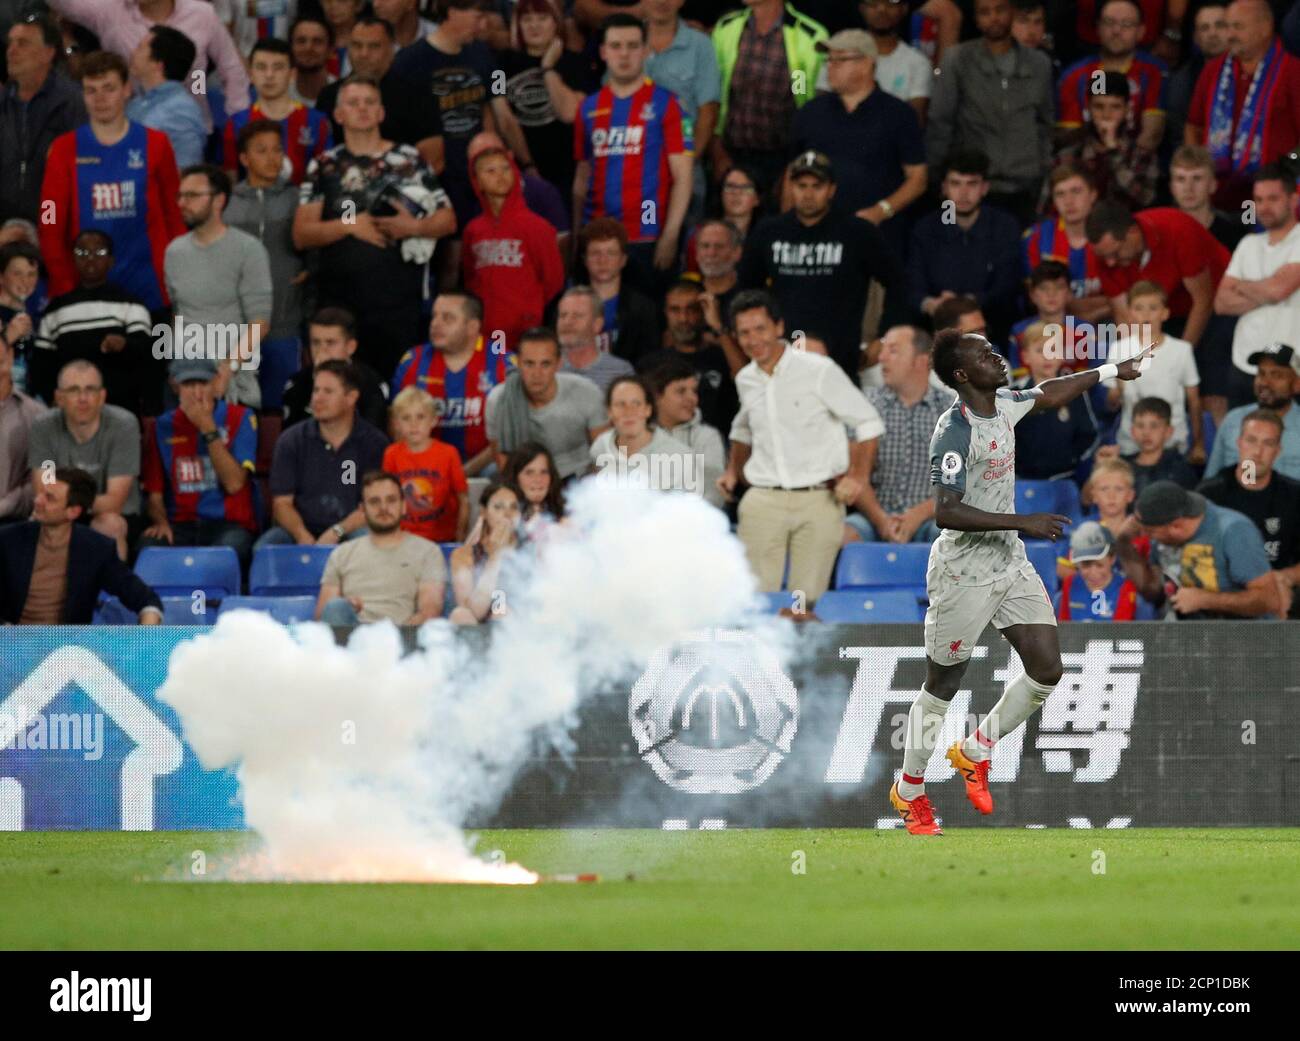 Soccer Football - Premier League - Crystal Palace v Liverpool - Selhurst Park, London, Britain - August 20, 2018  Liverpool's Sadio Mane celebrates scoring their second goal                          Action Images via Reuters/John Sibley  EDITORIAL USE ONLY. No use with unauthorized audio, video, data, fixture lists, club/league logos or 'live' services. Online in-match use limited to 75 images, no video emulation. No use in betting, games or single club/league/player publications.  Please contact your account representative for further details. Stock Photo